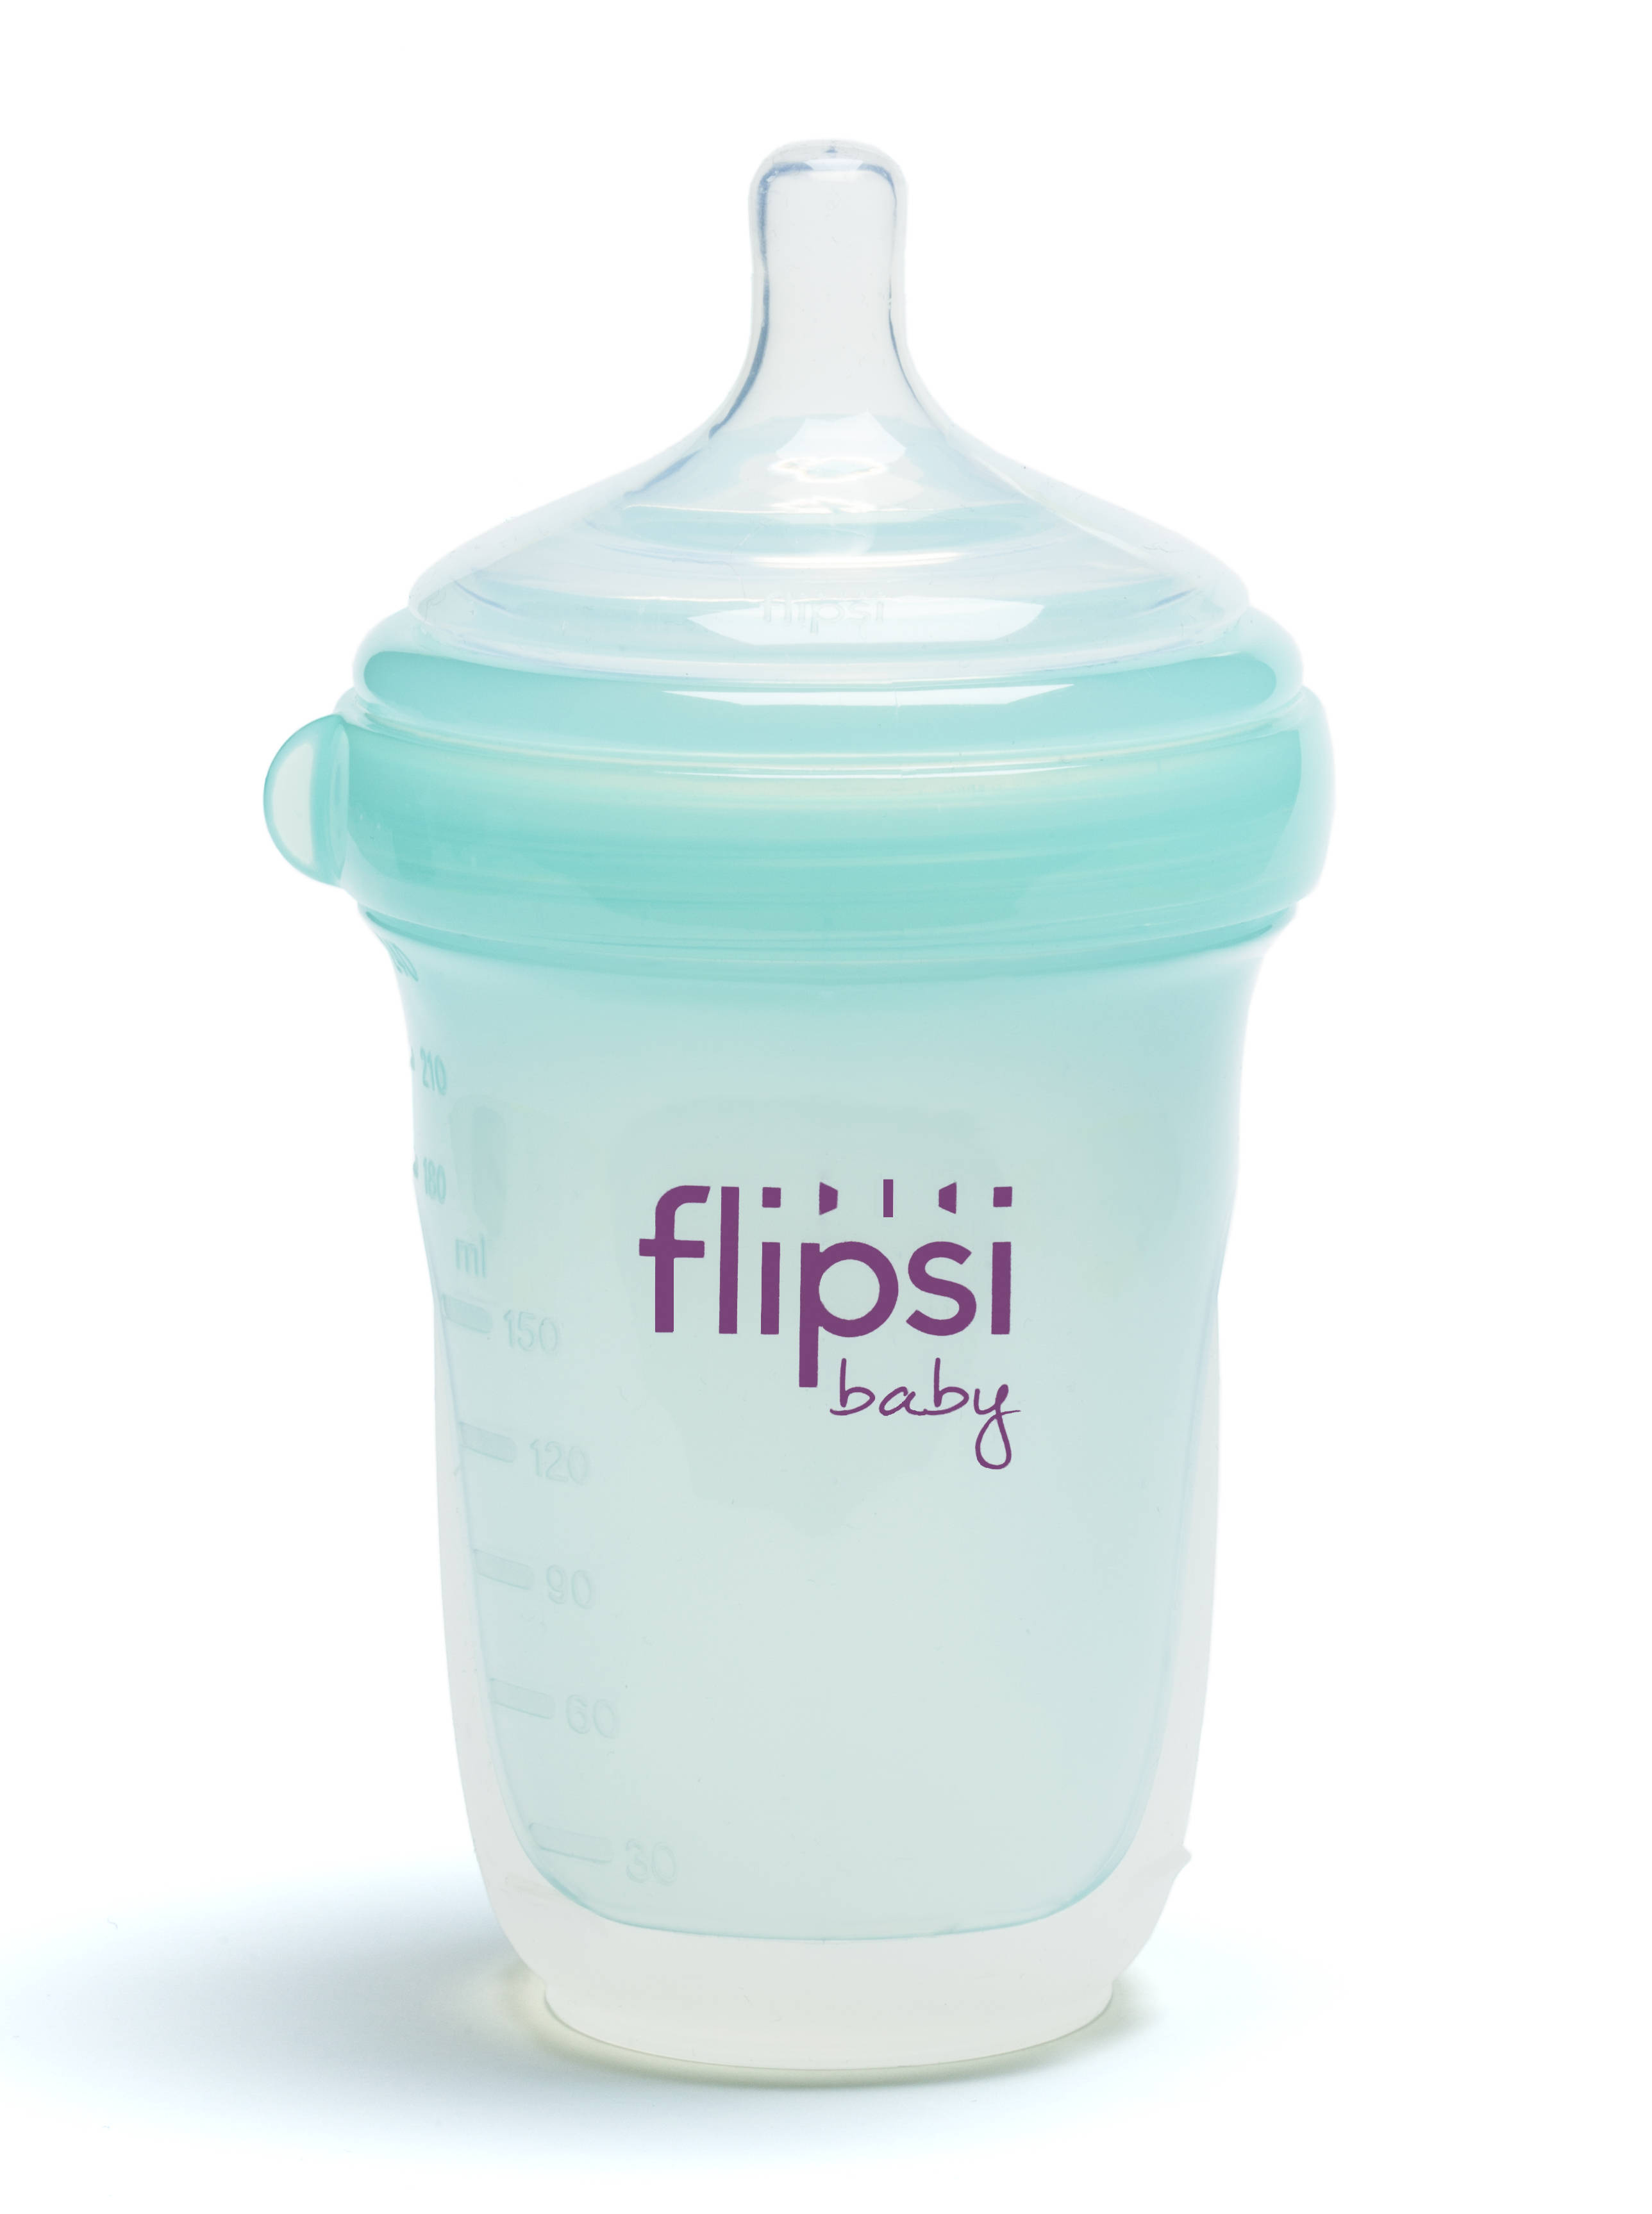 The infant feeding bottle is designed with a natural nipple shape to help ease the transition between breastfeeding and bottle.